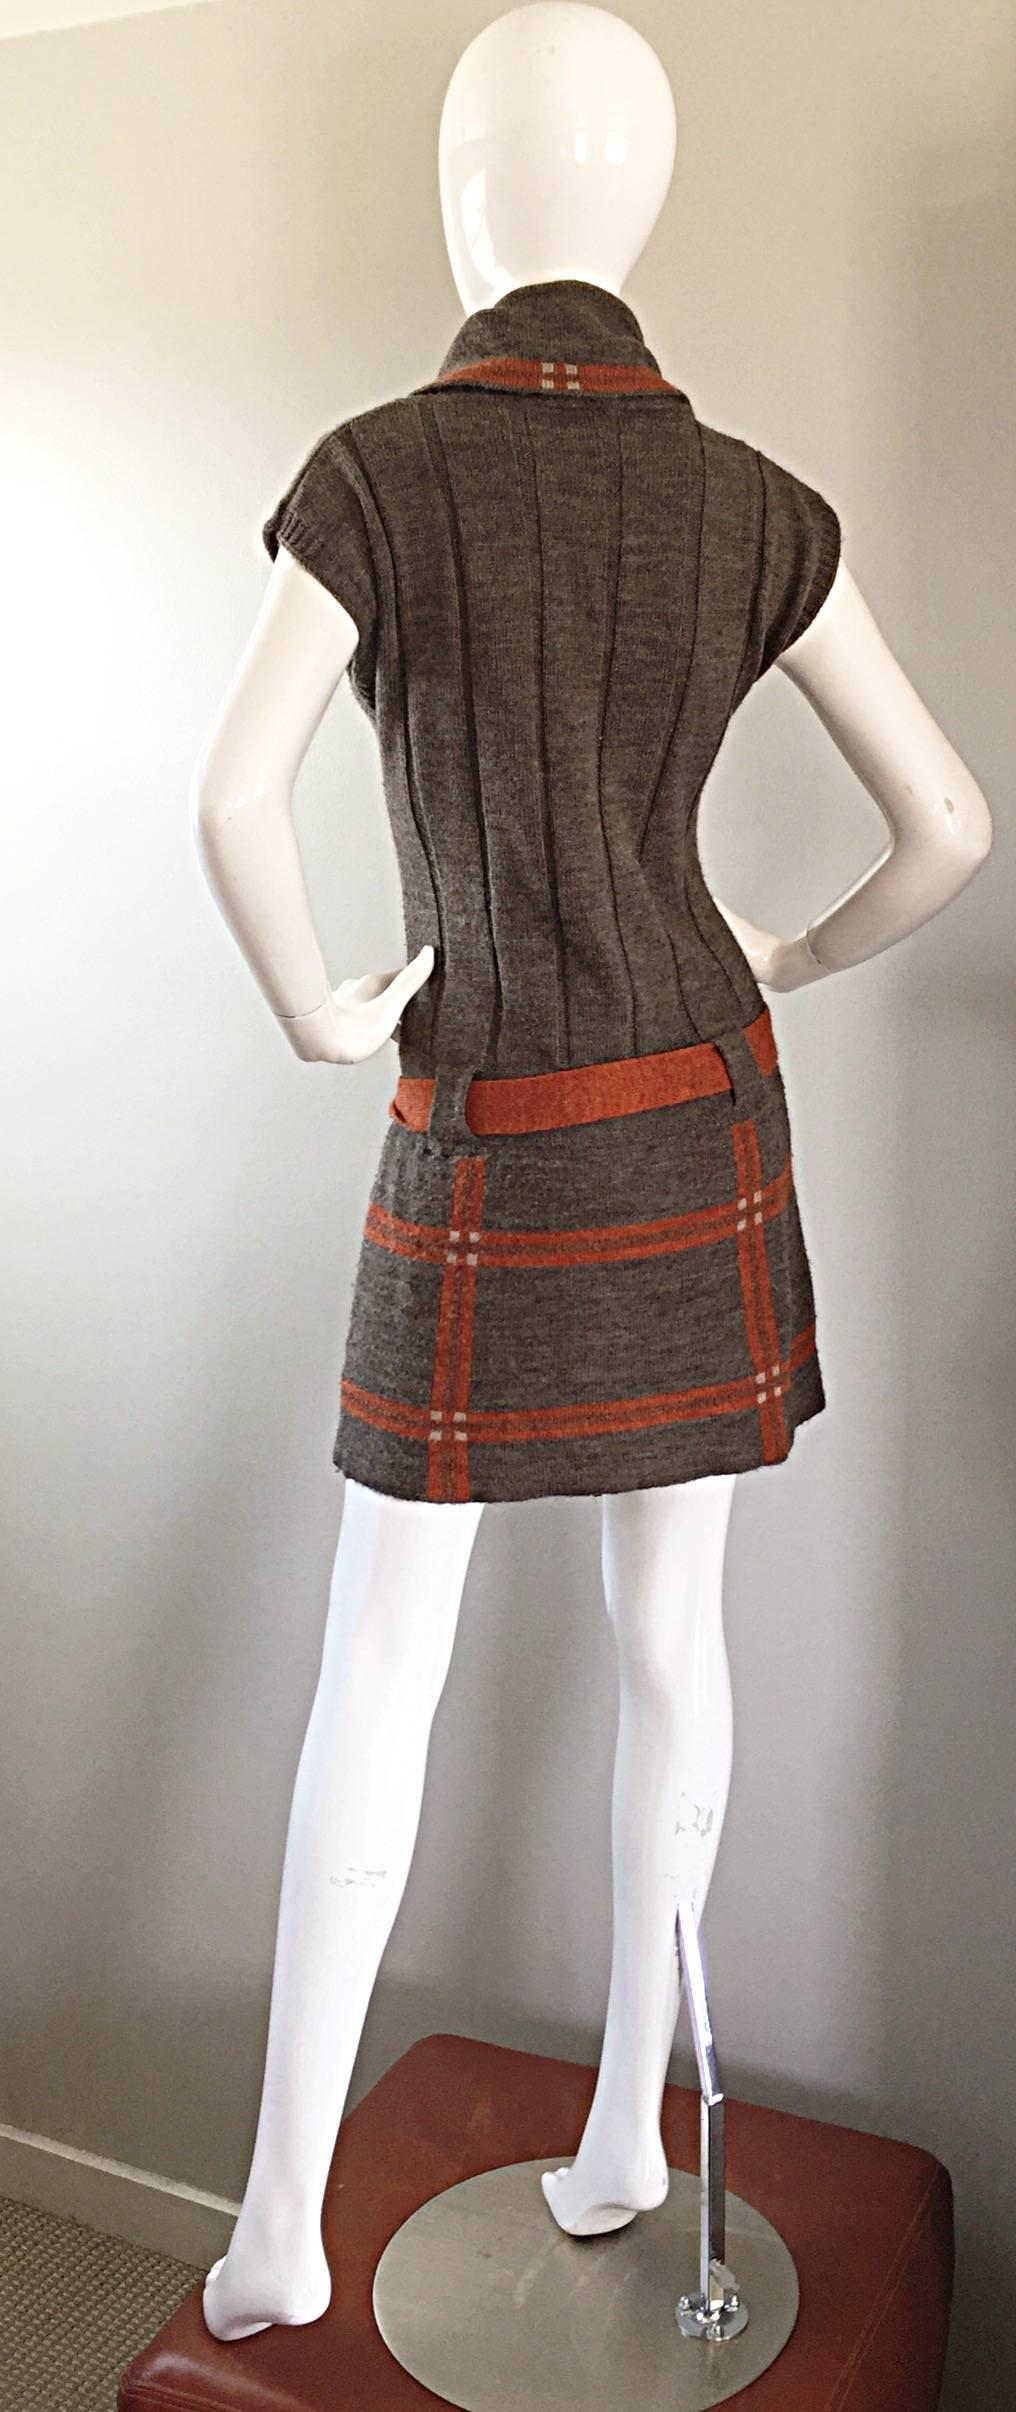 Vintage Cocogio Brown + Grey + Orange Cowl Neck Belted Plaid Sweater Dress 1